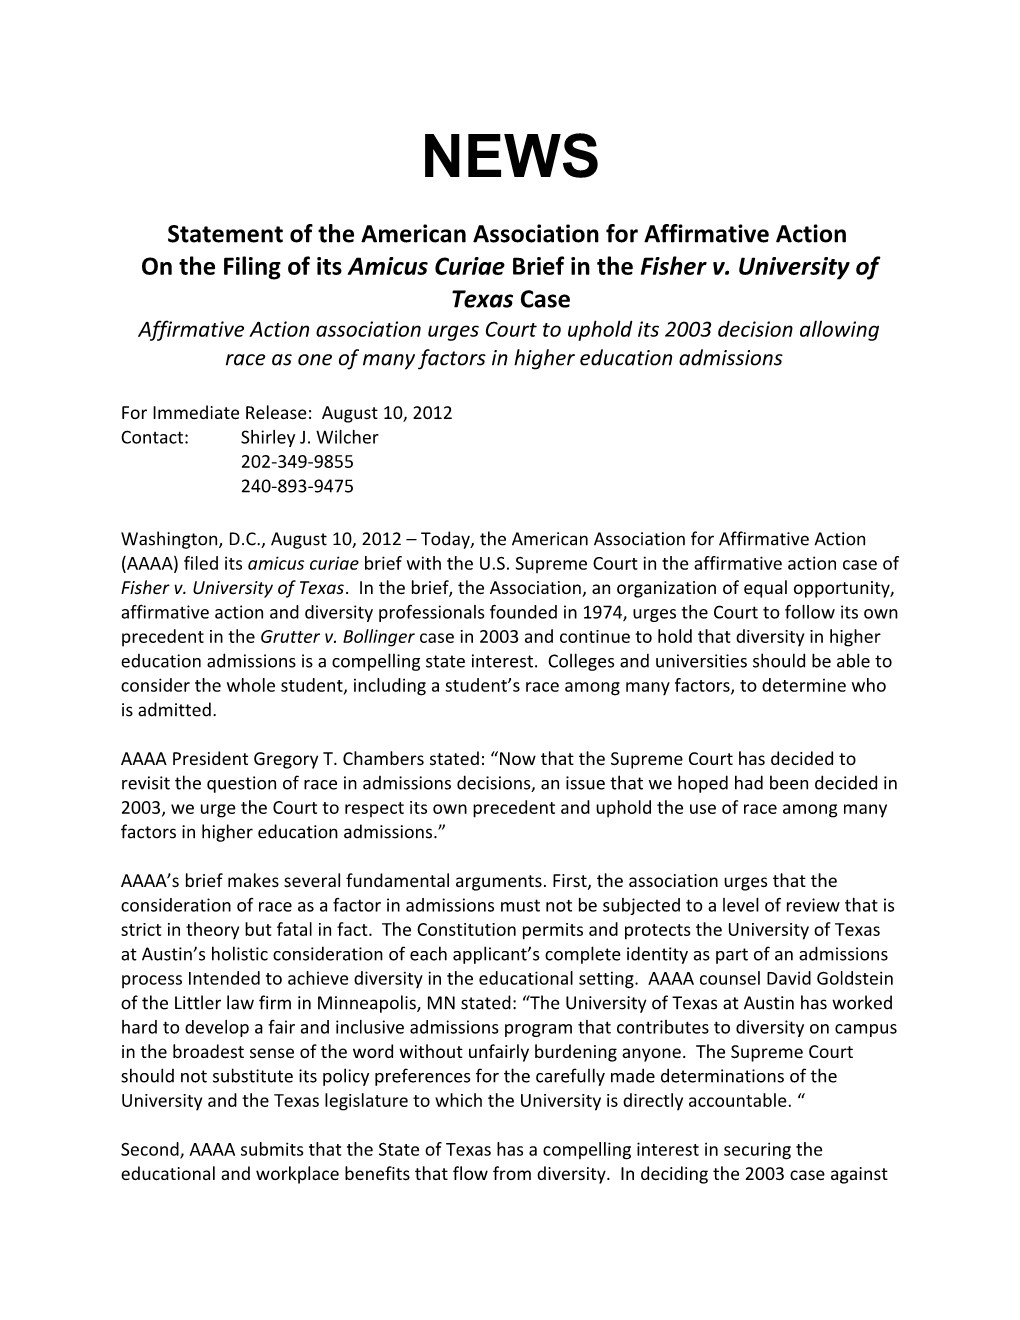 Statement of the American Association for Affirmative Action